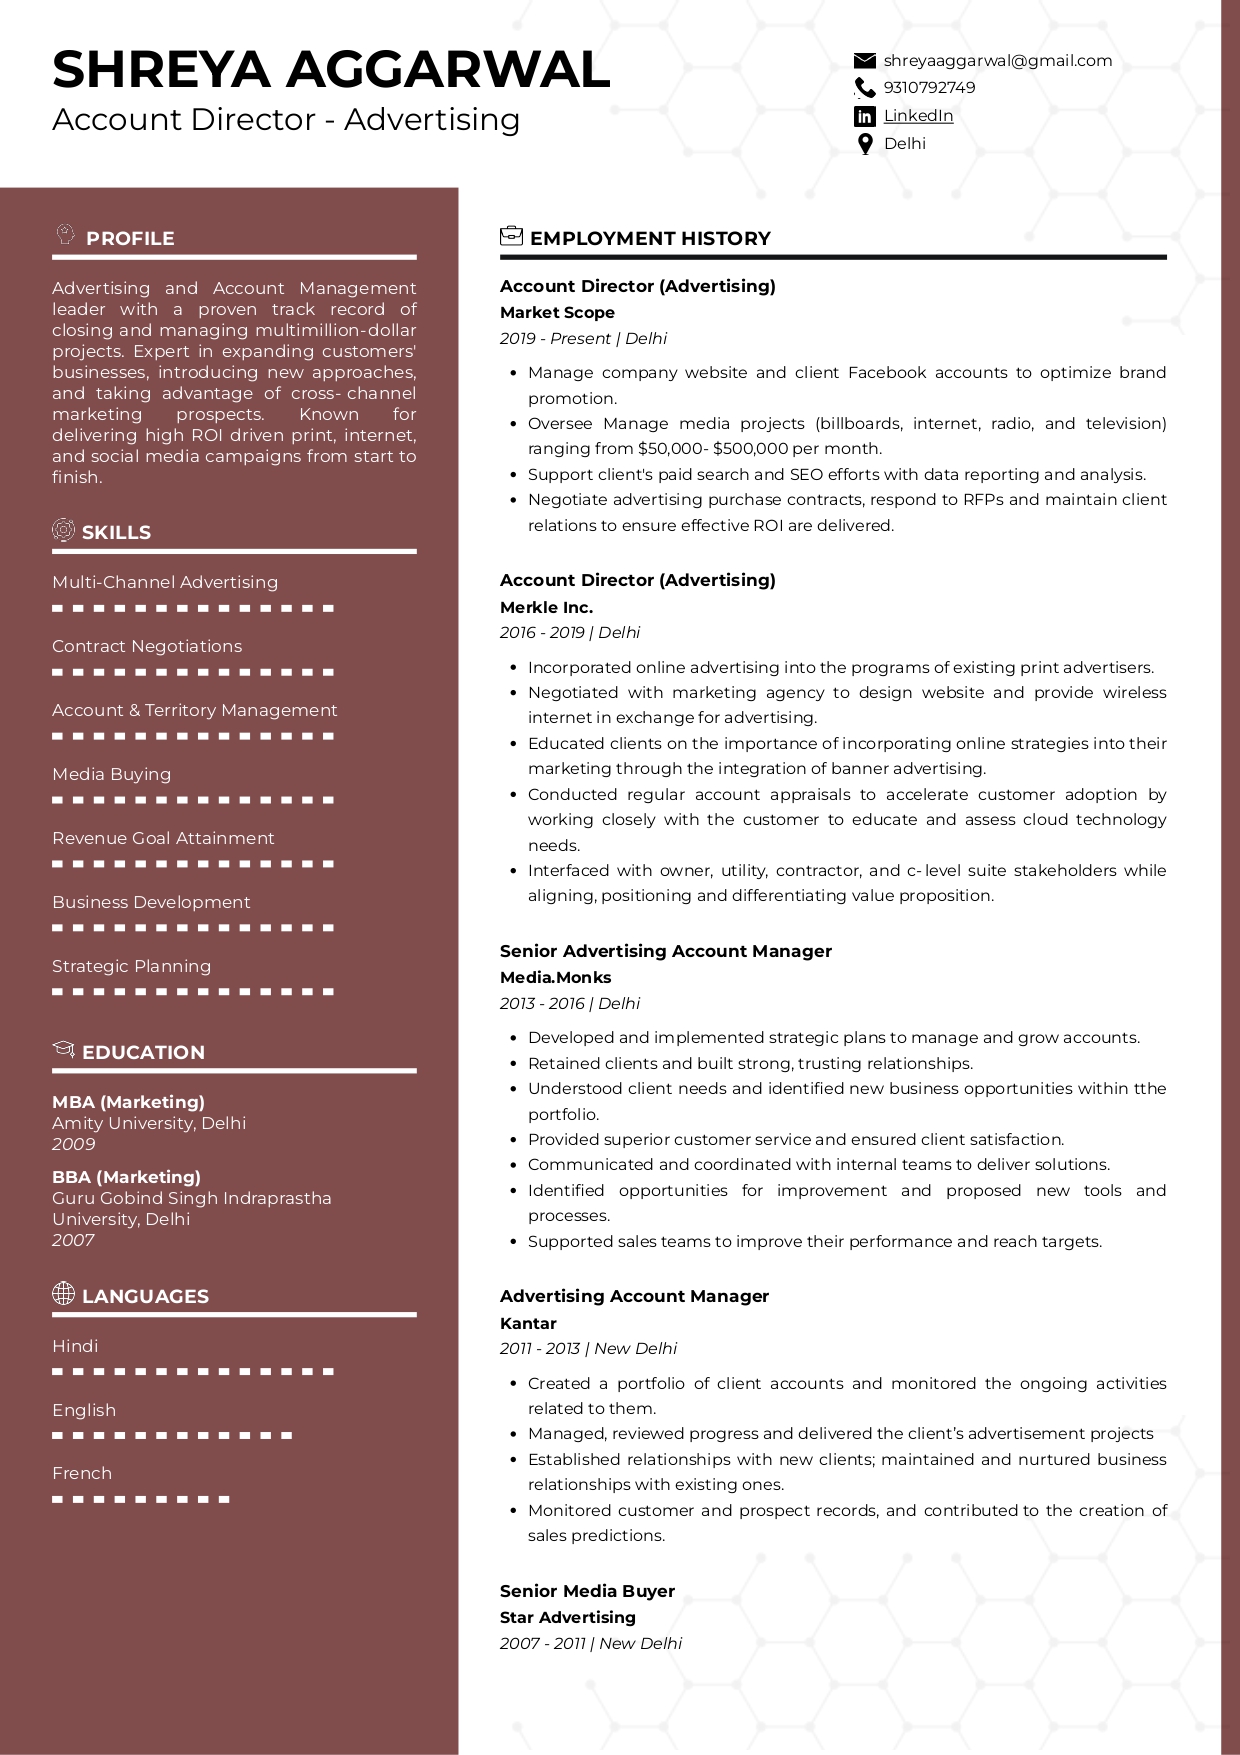 Sample Resume of Account Director-Advertising | Free Resume Templates & Samples on Resumod.co